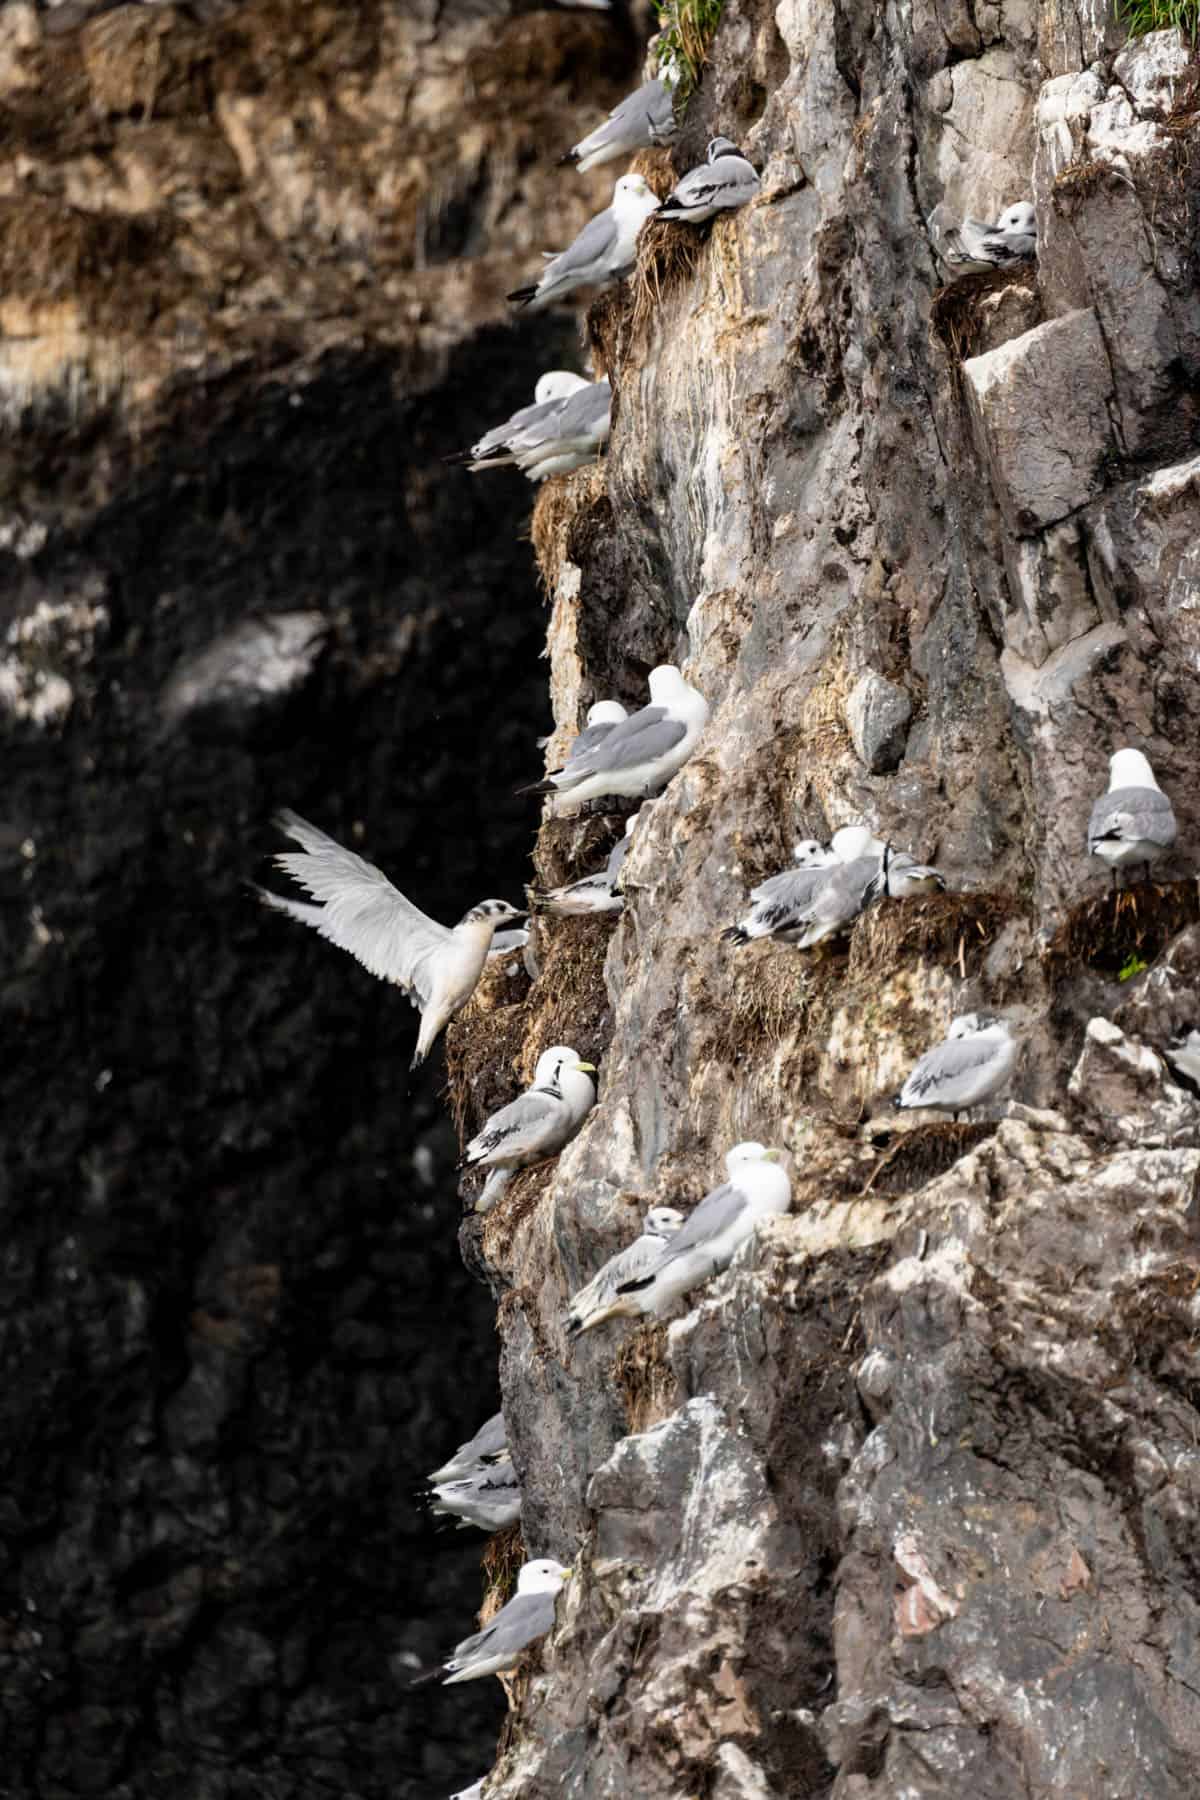 A bird landing on rocks surrounded by other birds.